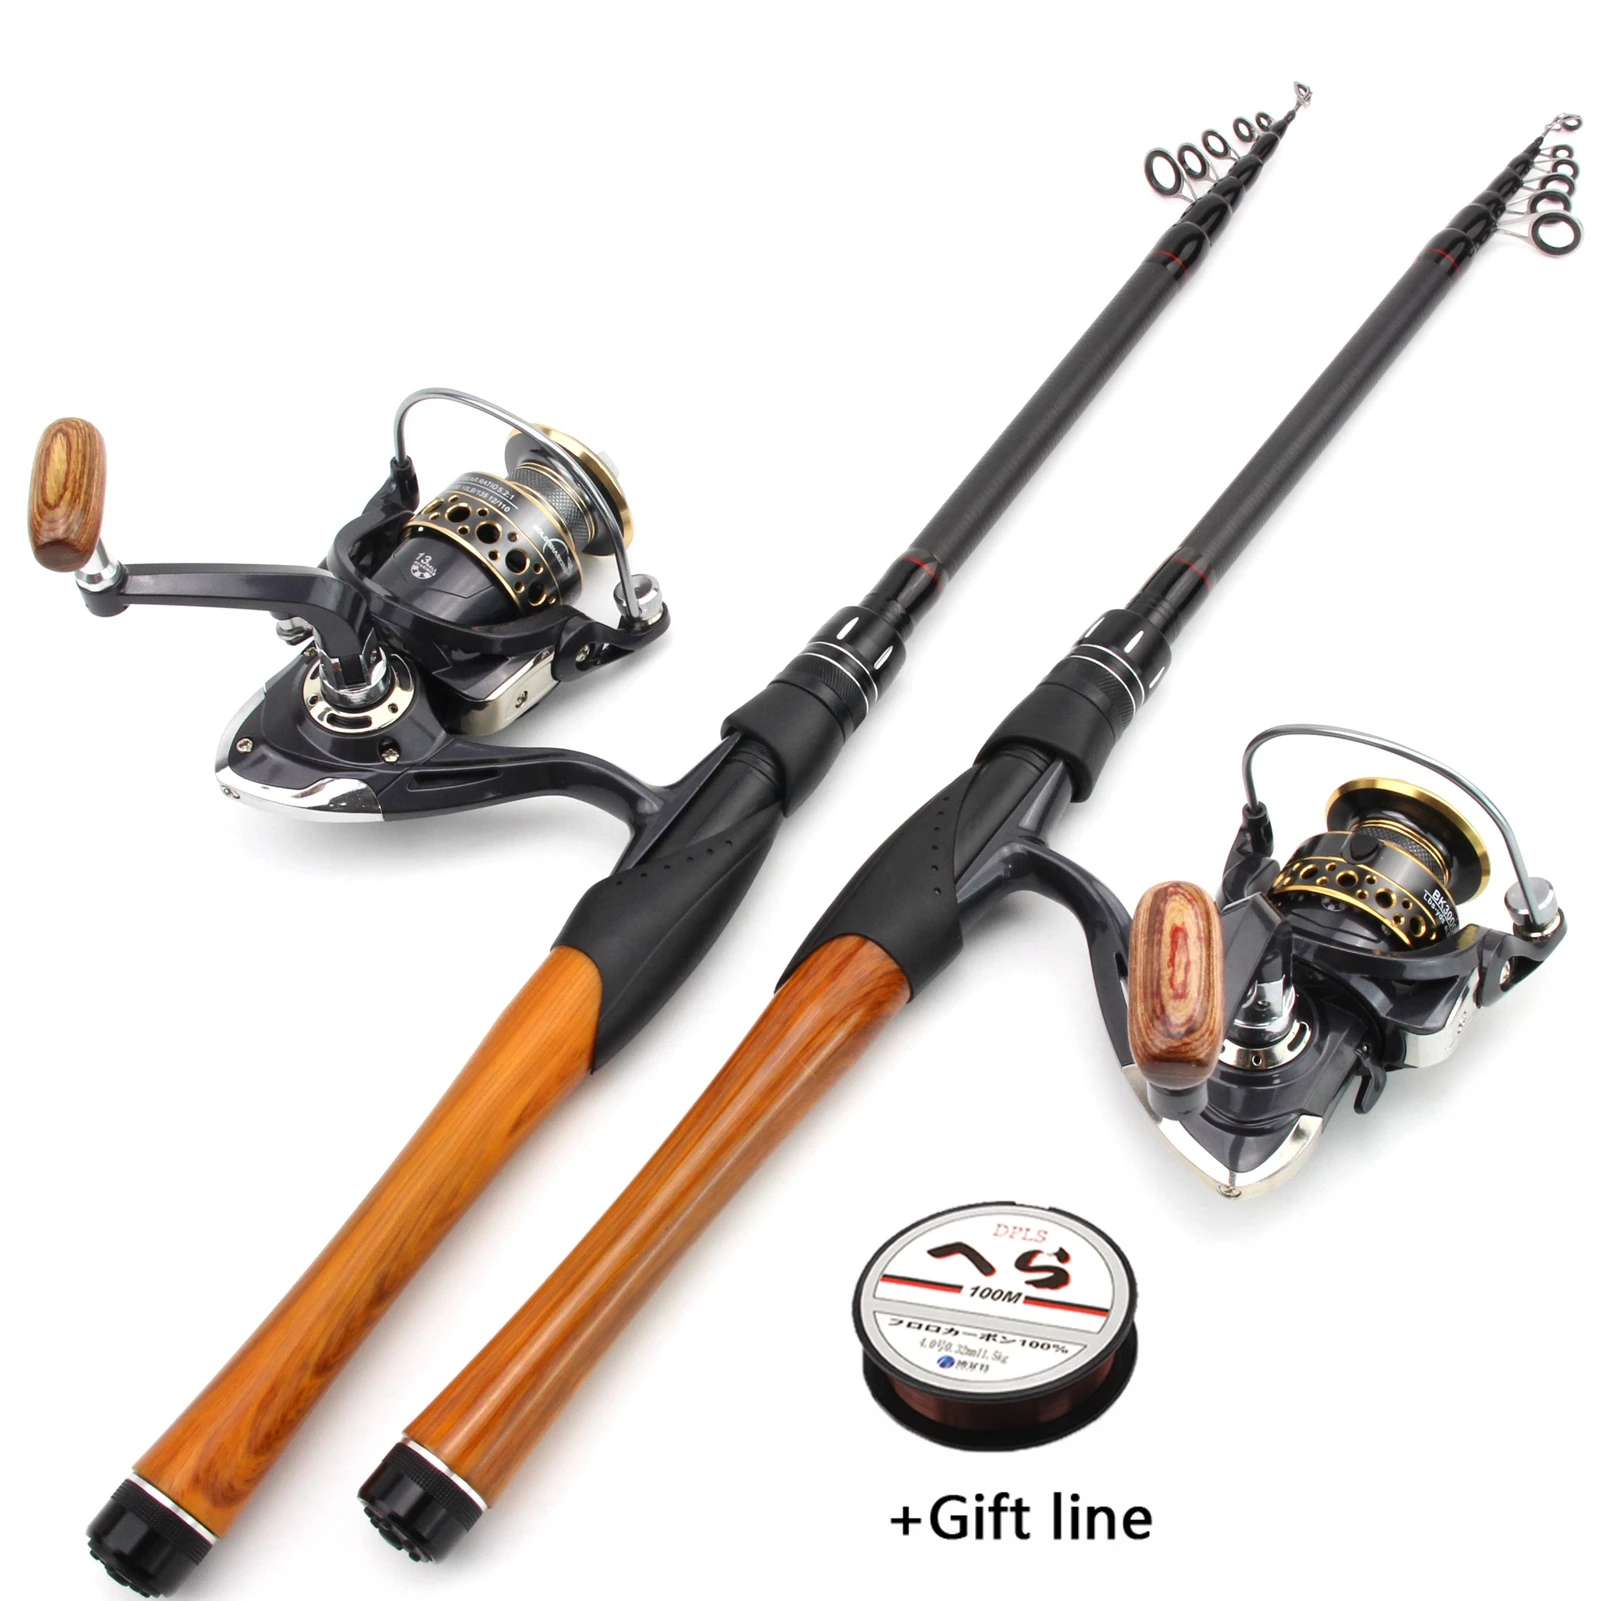 

NEW 1.8m2.1m2.4m2.7m Rod Reel Combos telescopic Spinning fishing rod Spinning Reels set carbon Pikes fish trout rods pesca